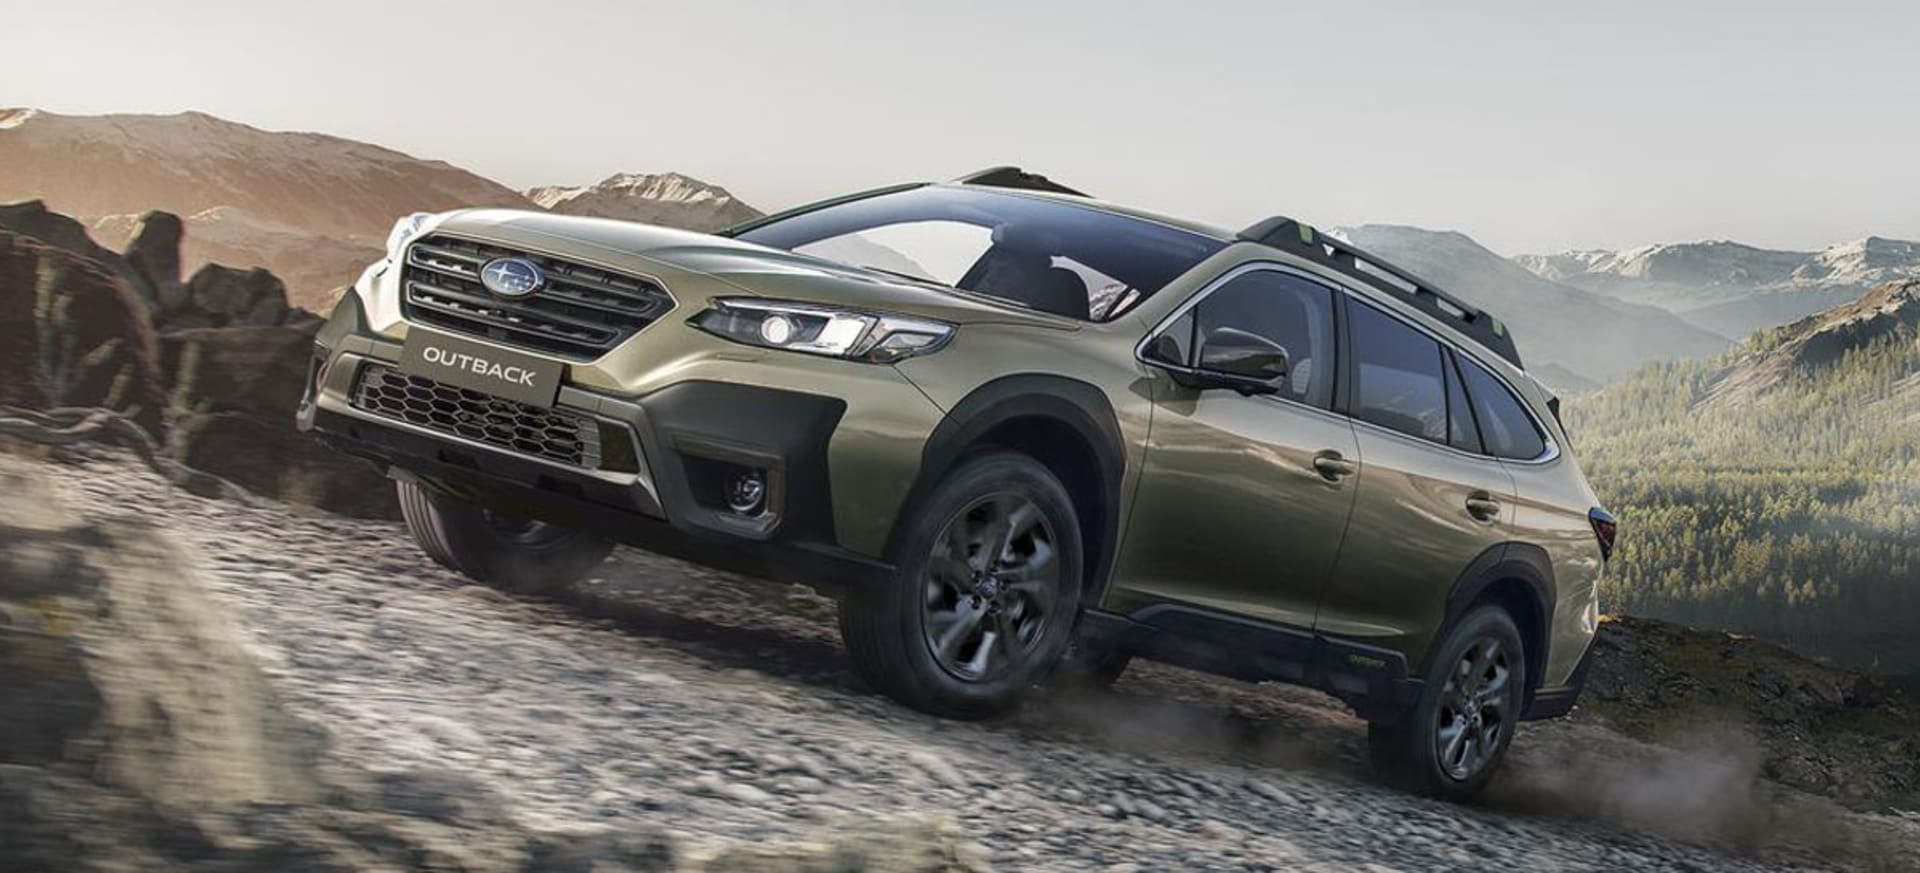 The new Outback